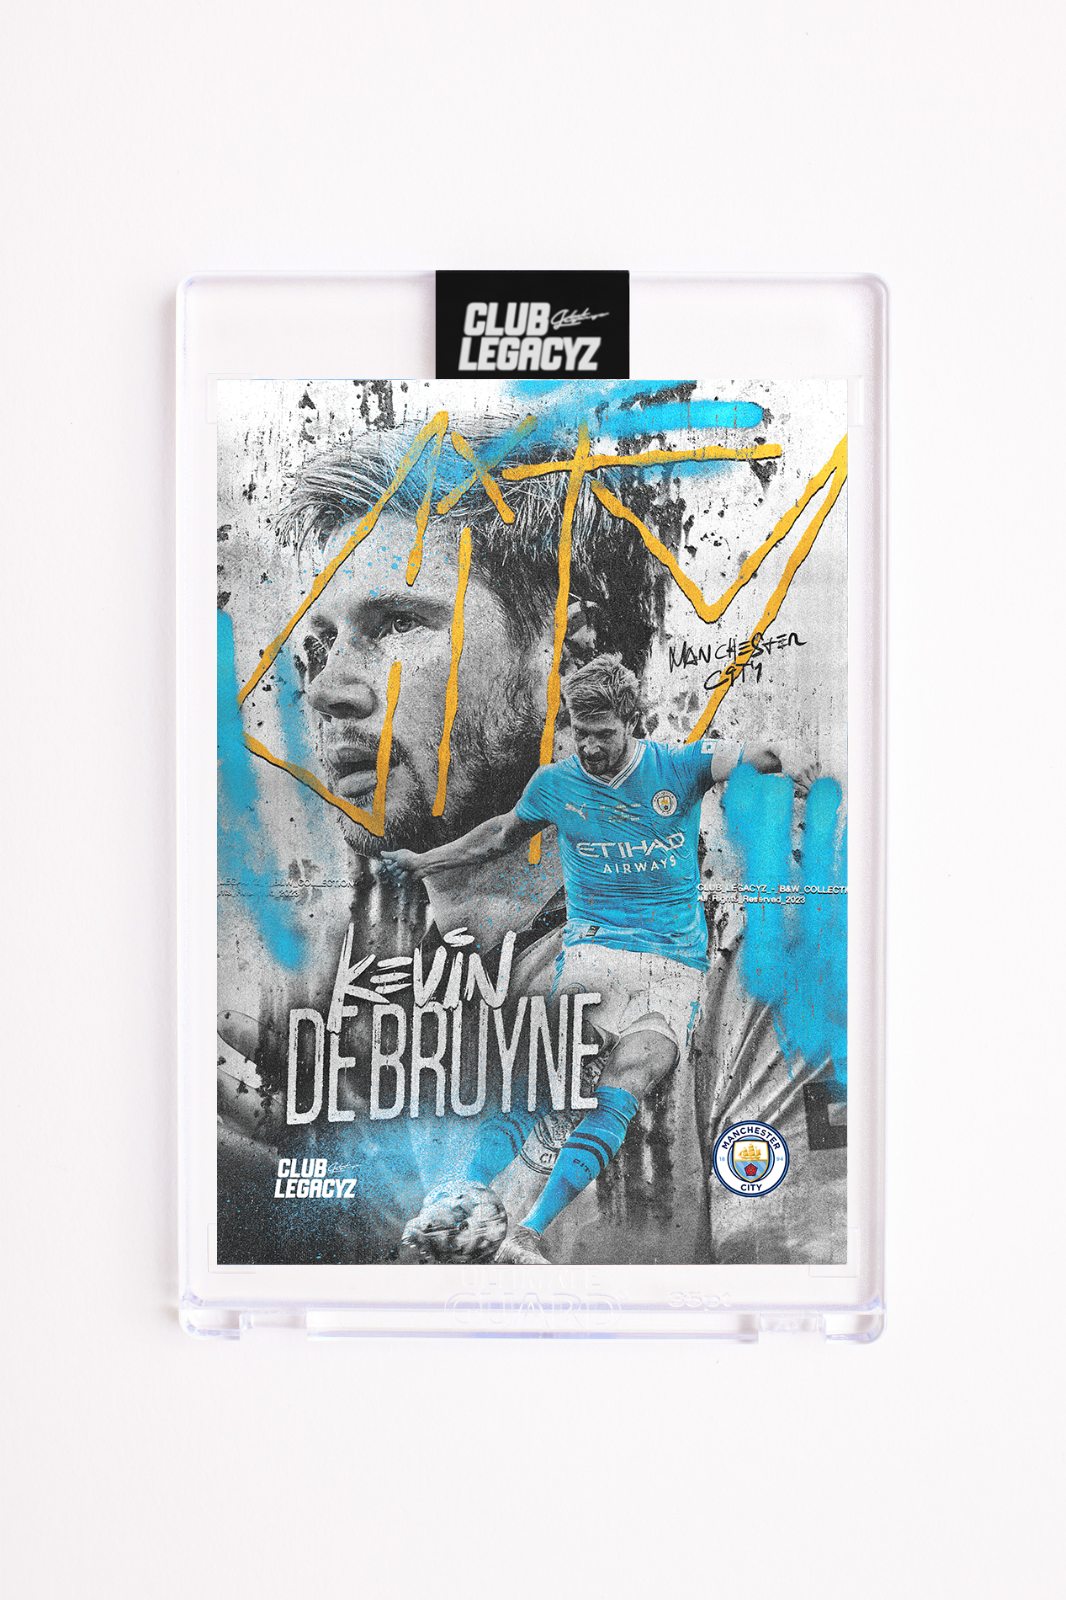 Manchester City - Icon Black & White Kevin de Bruyne 100 exemplaires